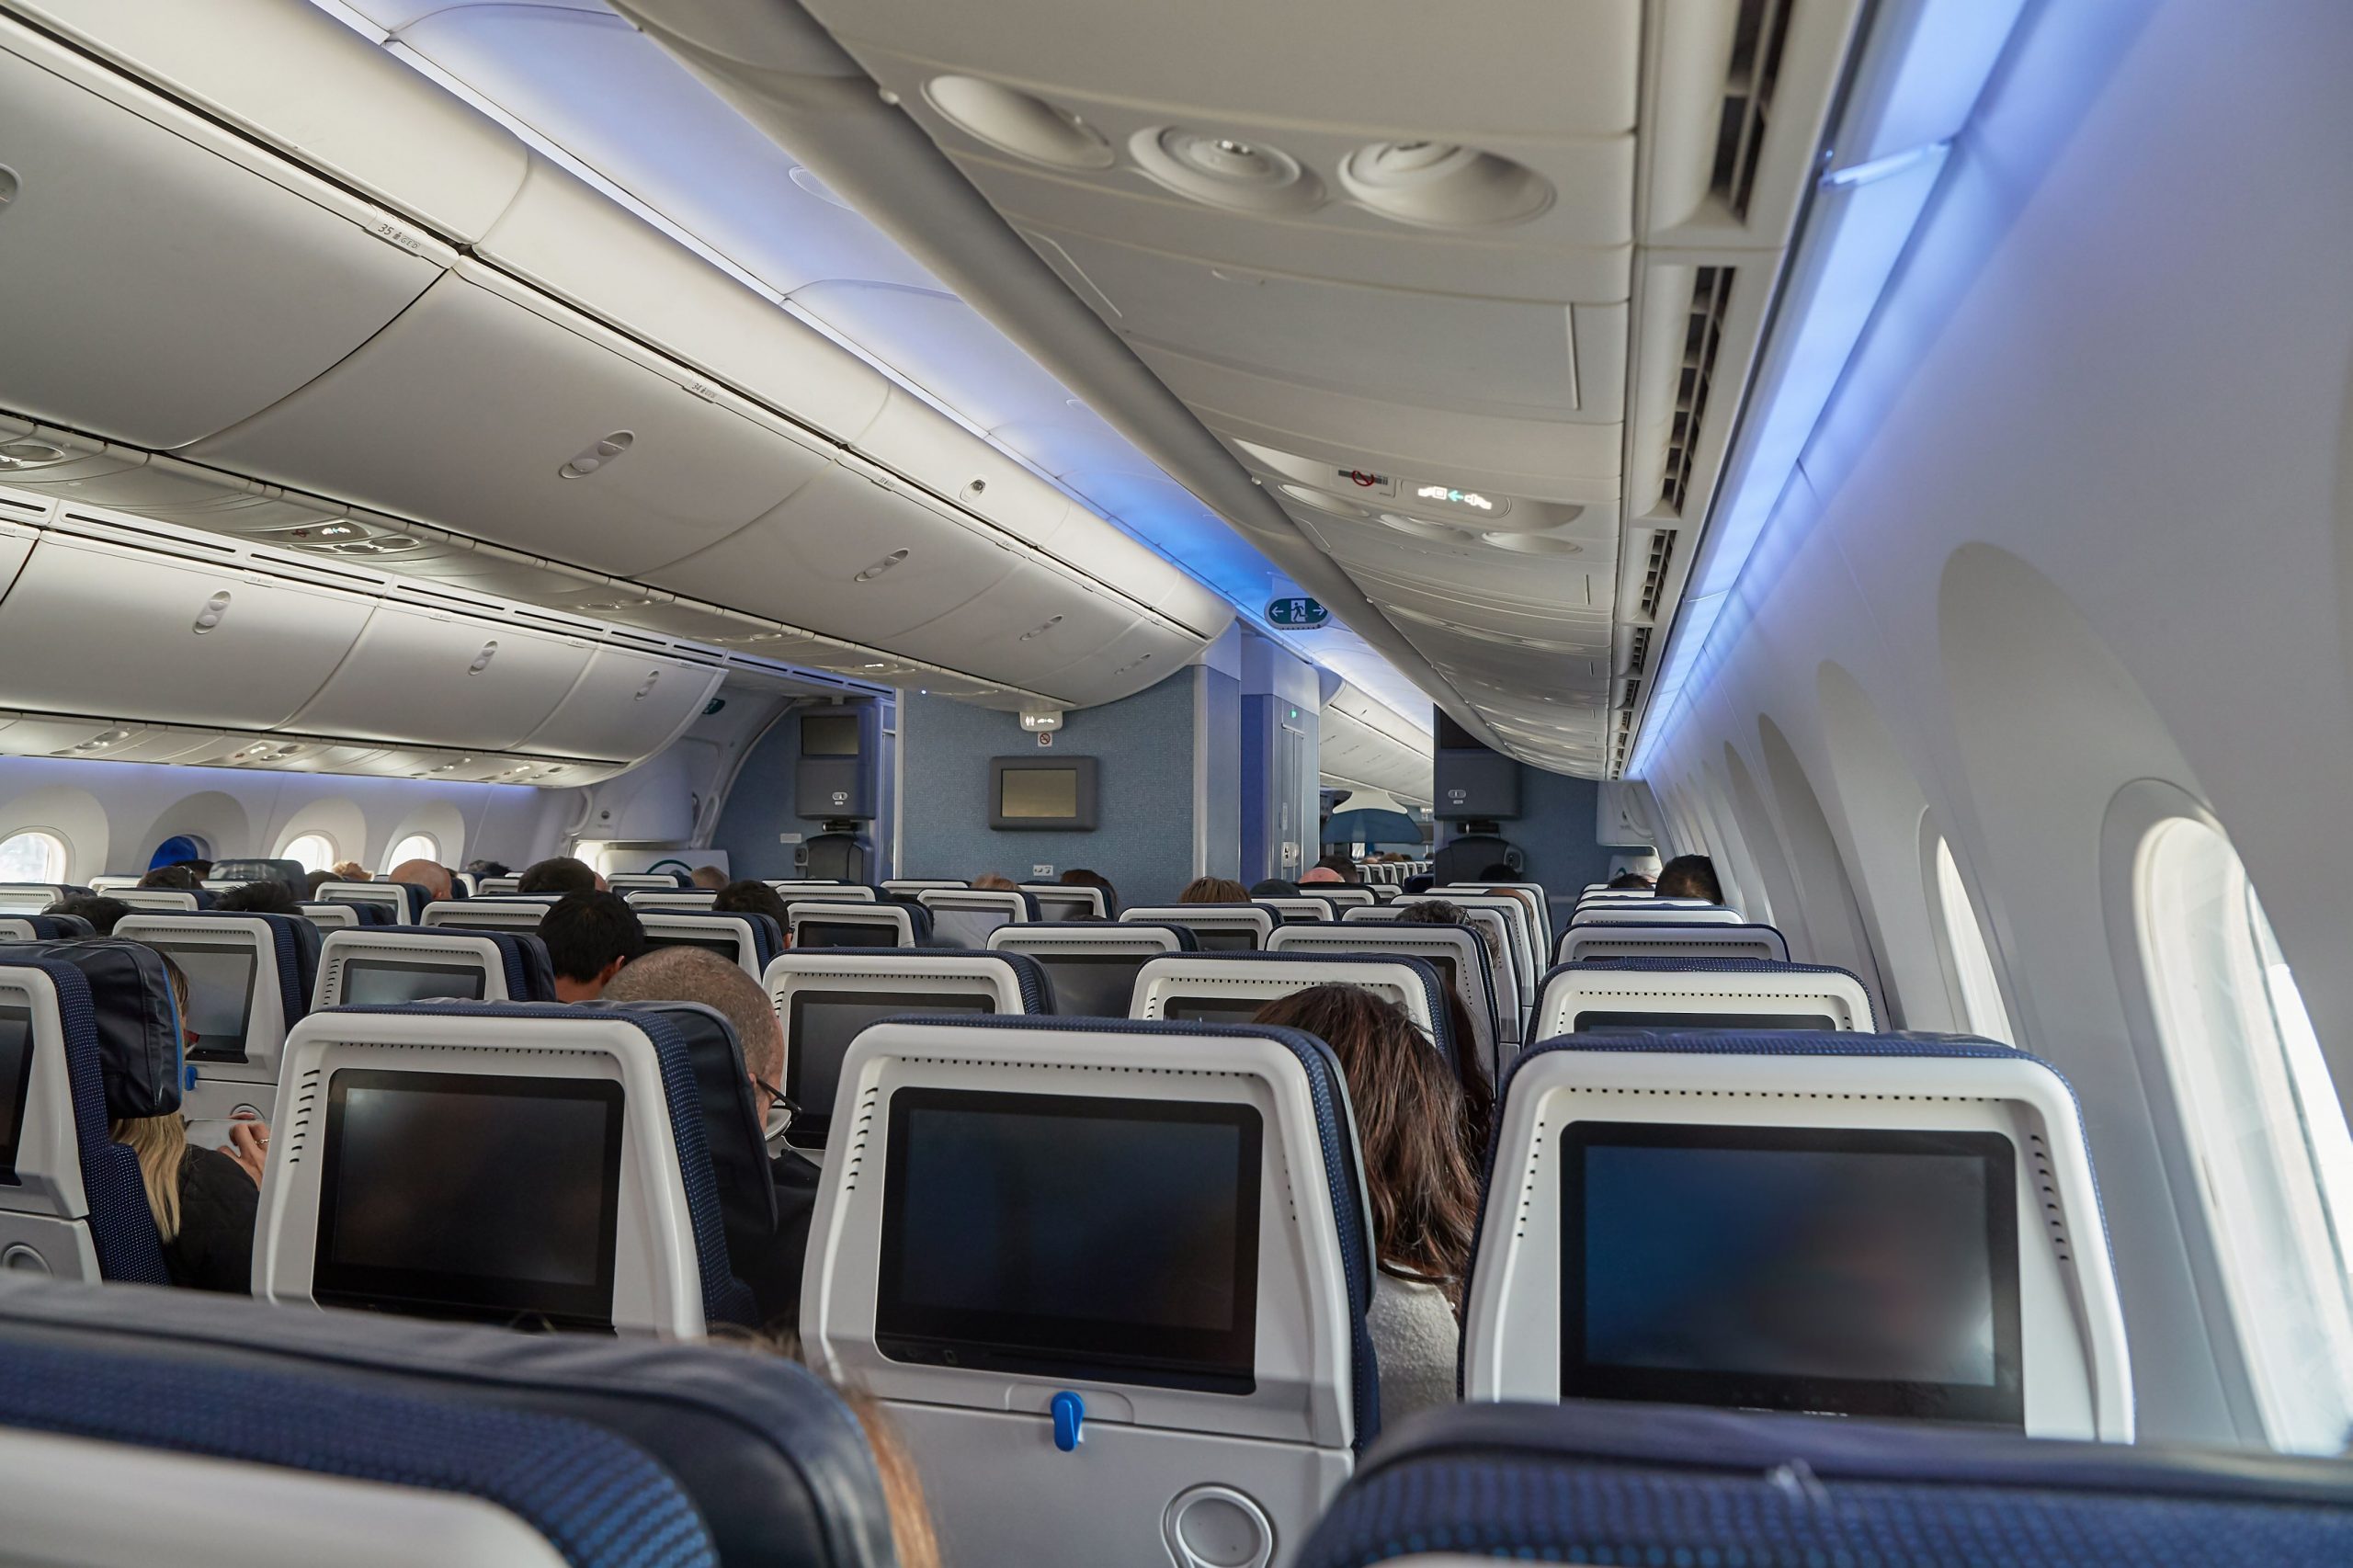 Is There a Safest Seat on a Plane?